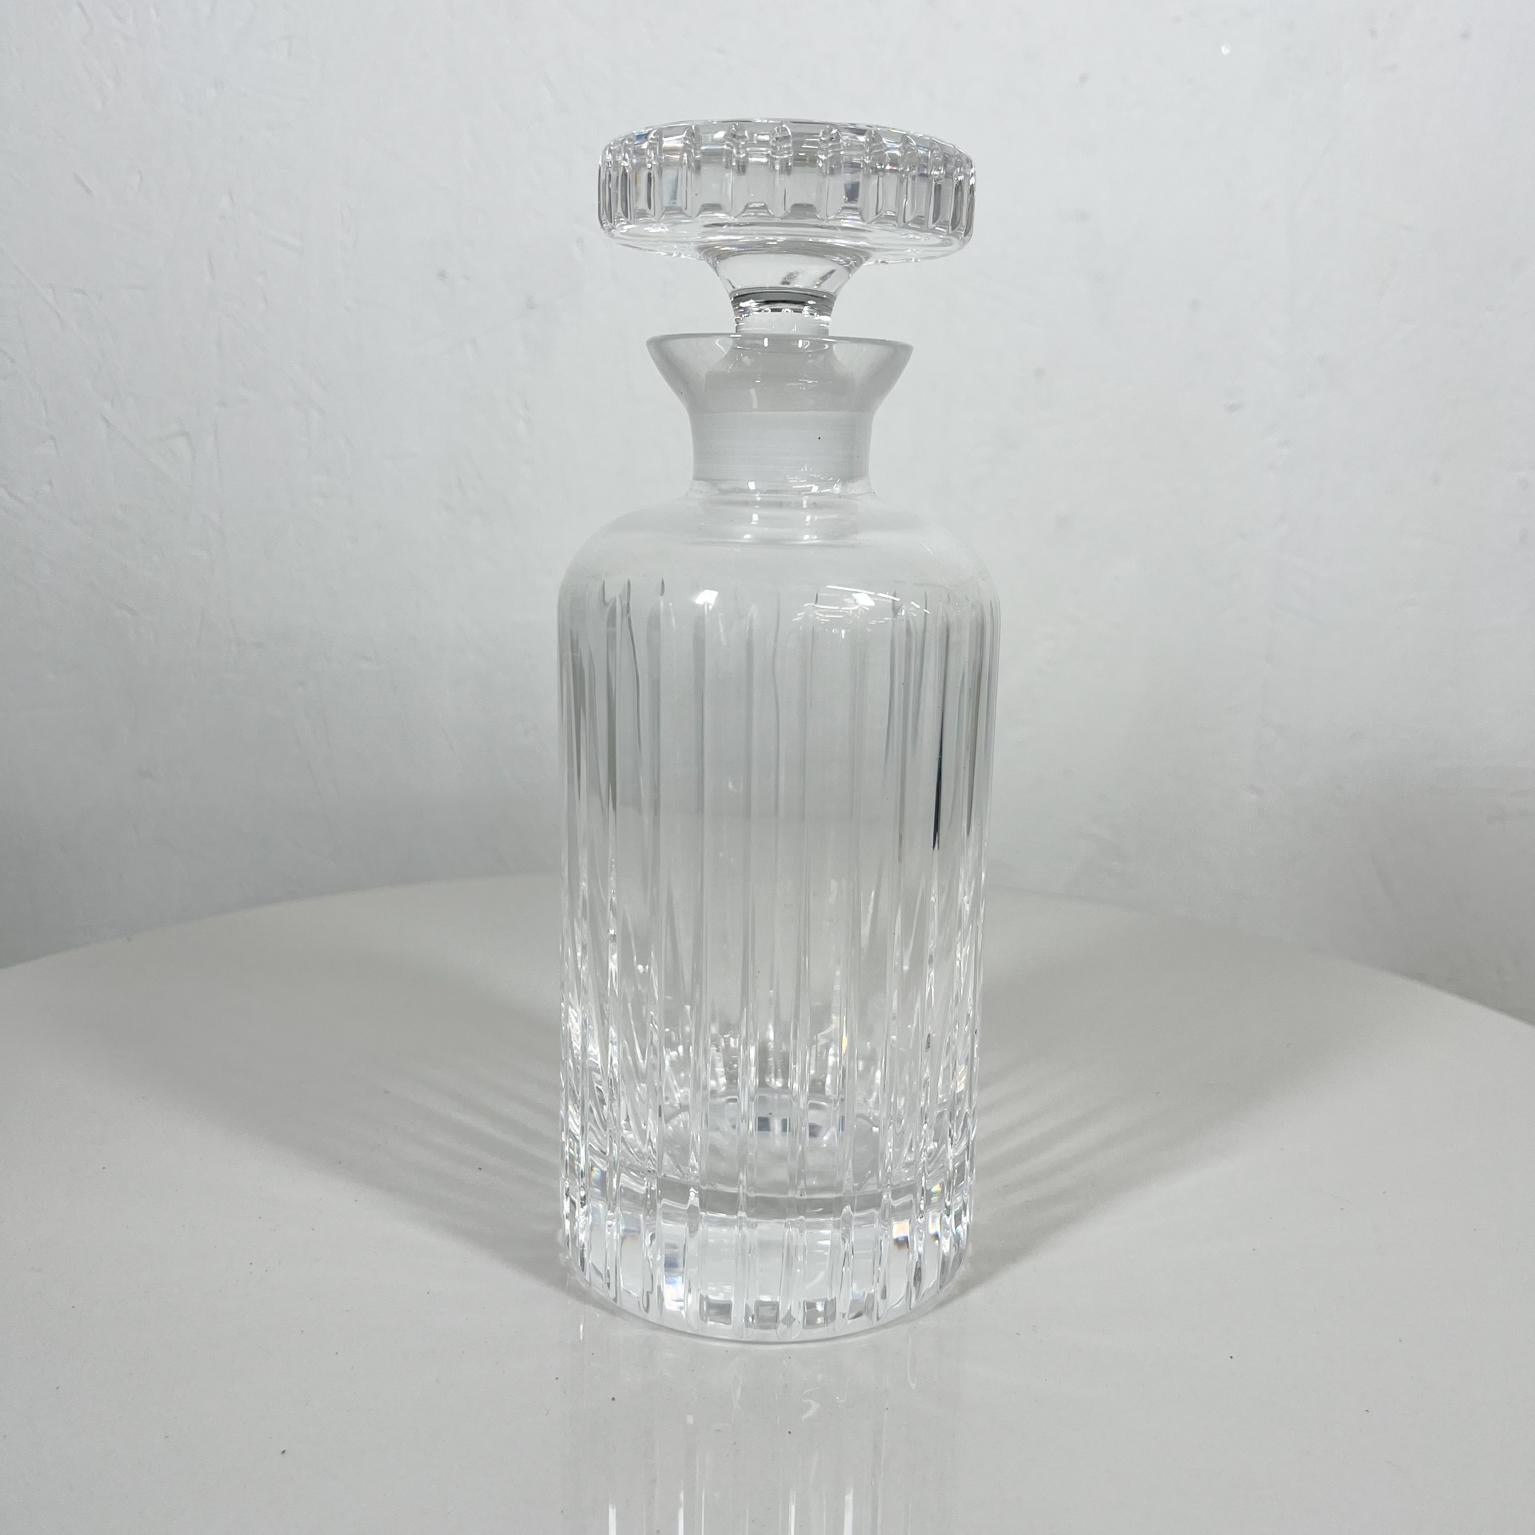 1960s Modern elegance ribbed crystal glass decanter from Italy.
Matching crystal Italian Ice bucket in another listing.
Measures: 9.75 tall x 3.88 diameter.
Original vintage preowned condition.
Faded maker stamp present.
Made in Italy genuine